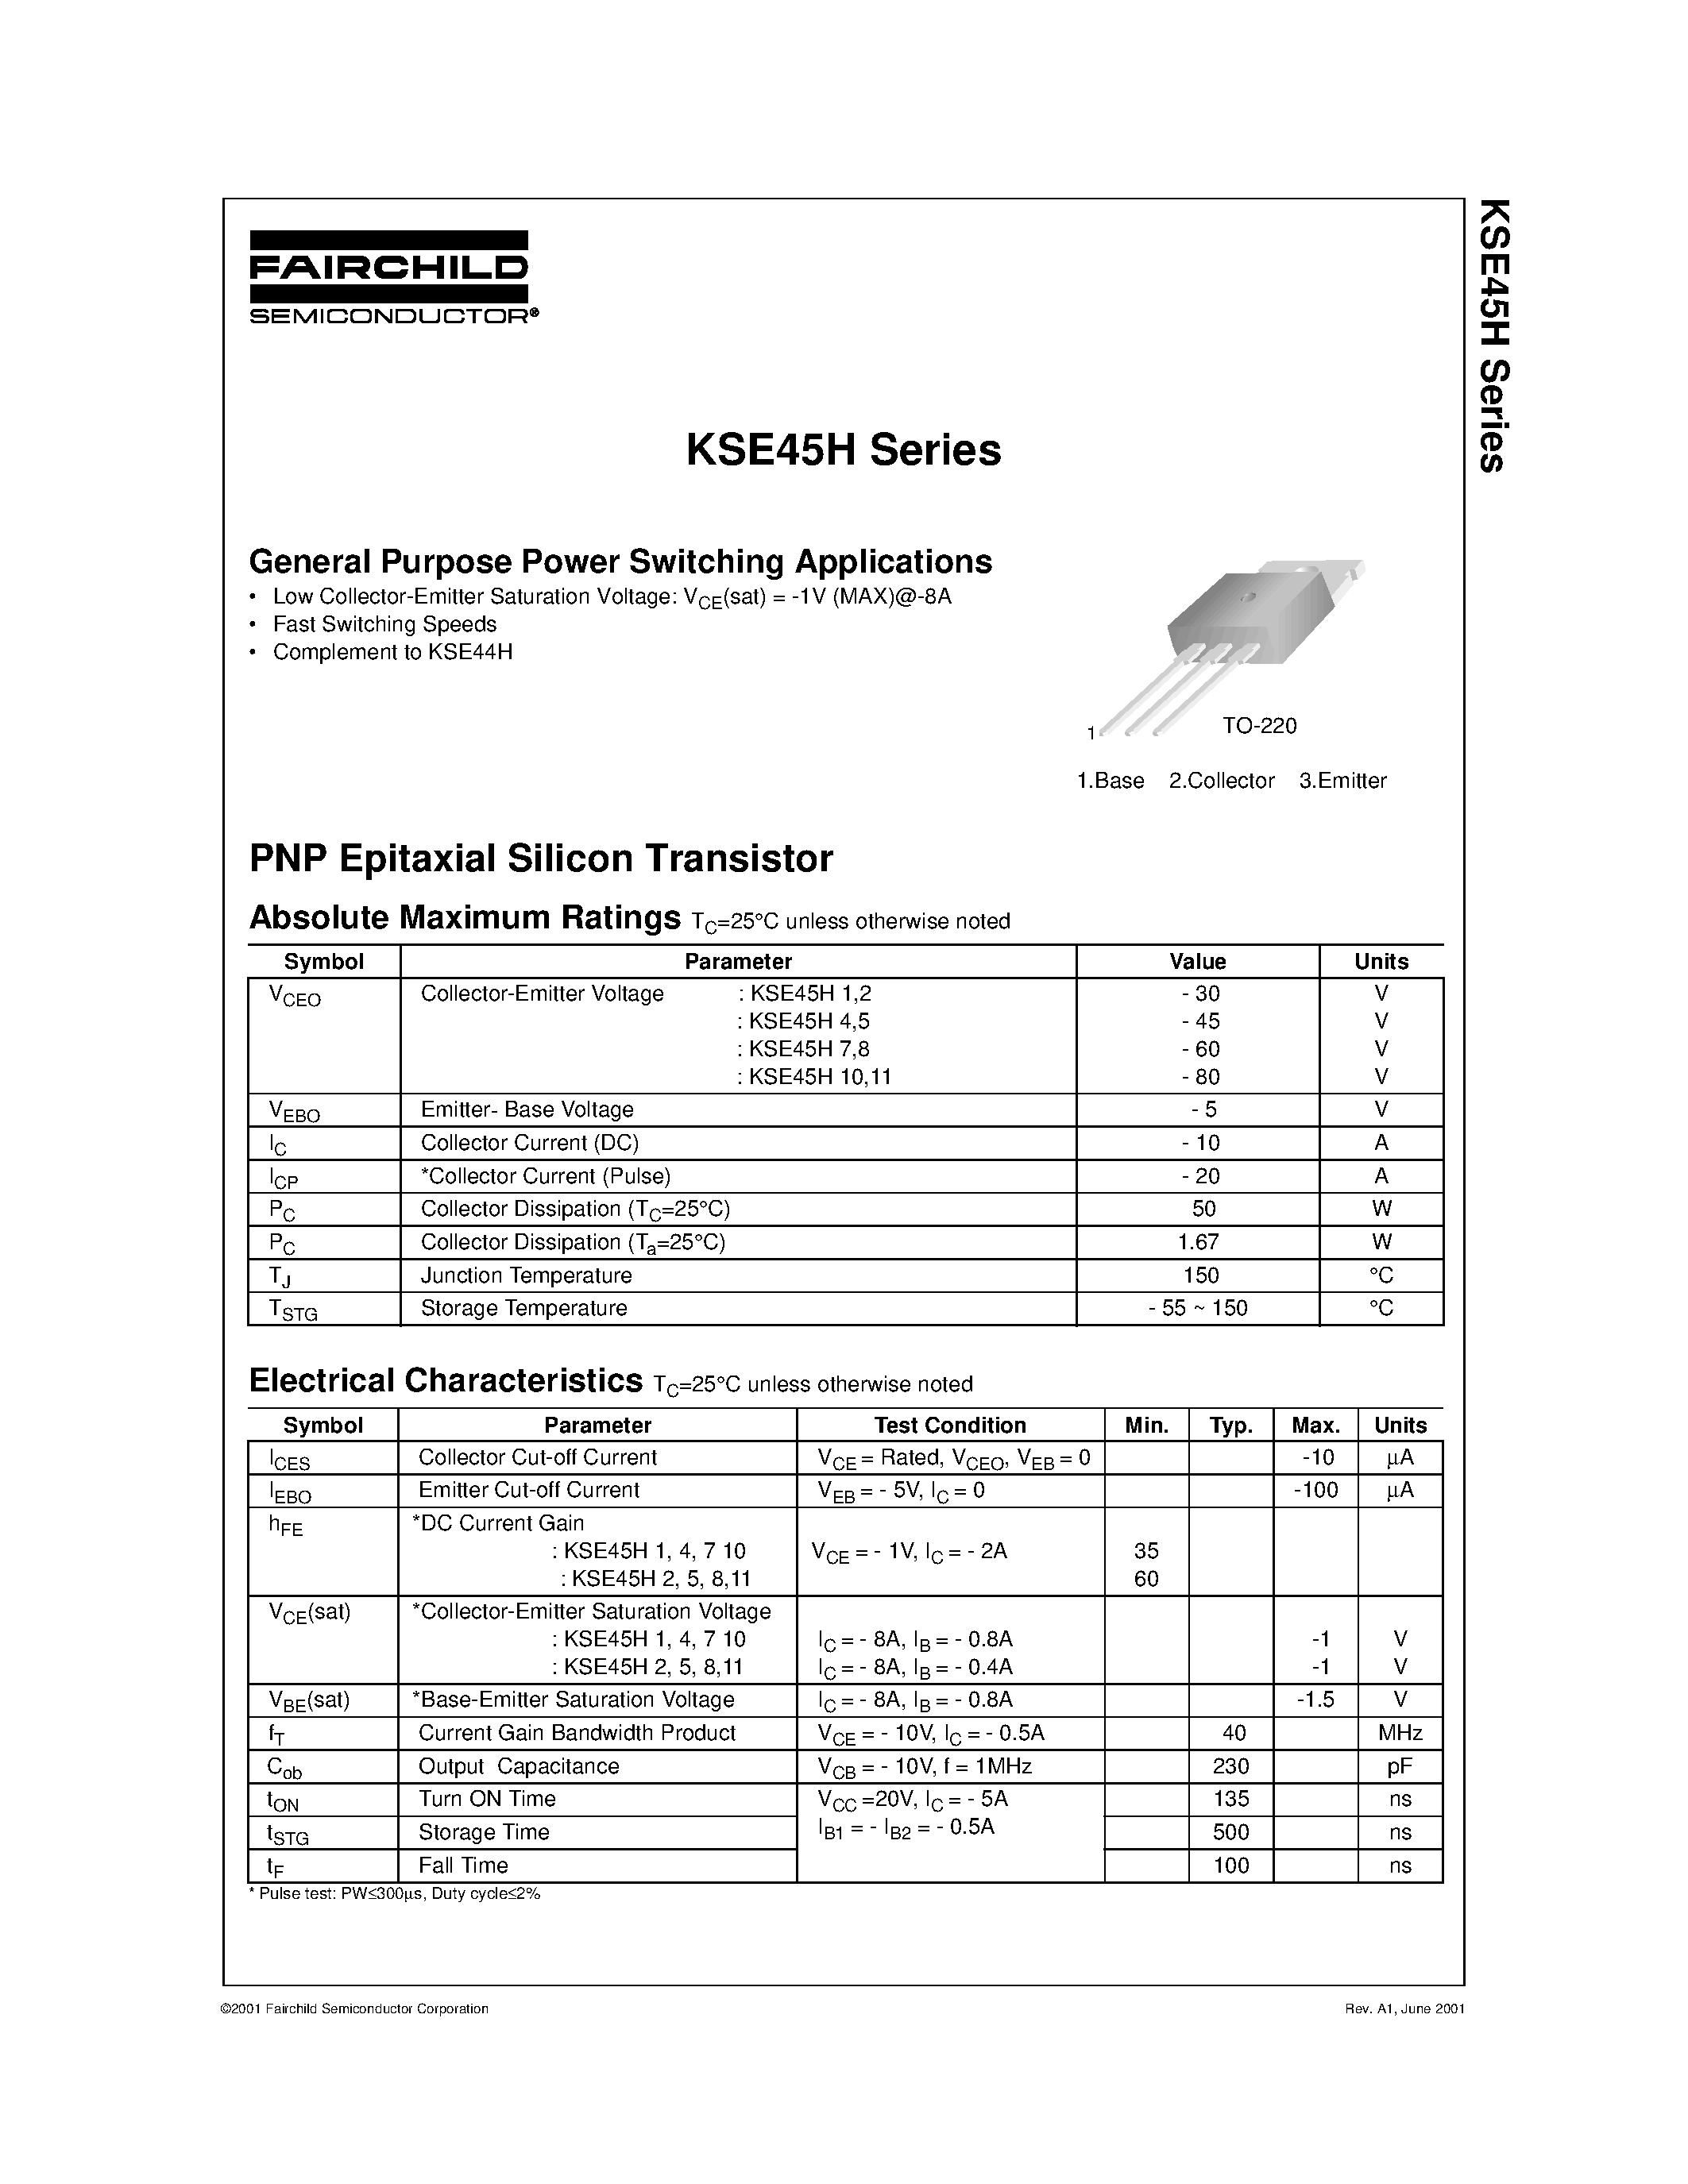 Даташит KSE45H7 - General Purpose Power Switching Applications страница 1